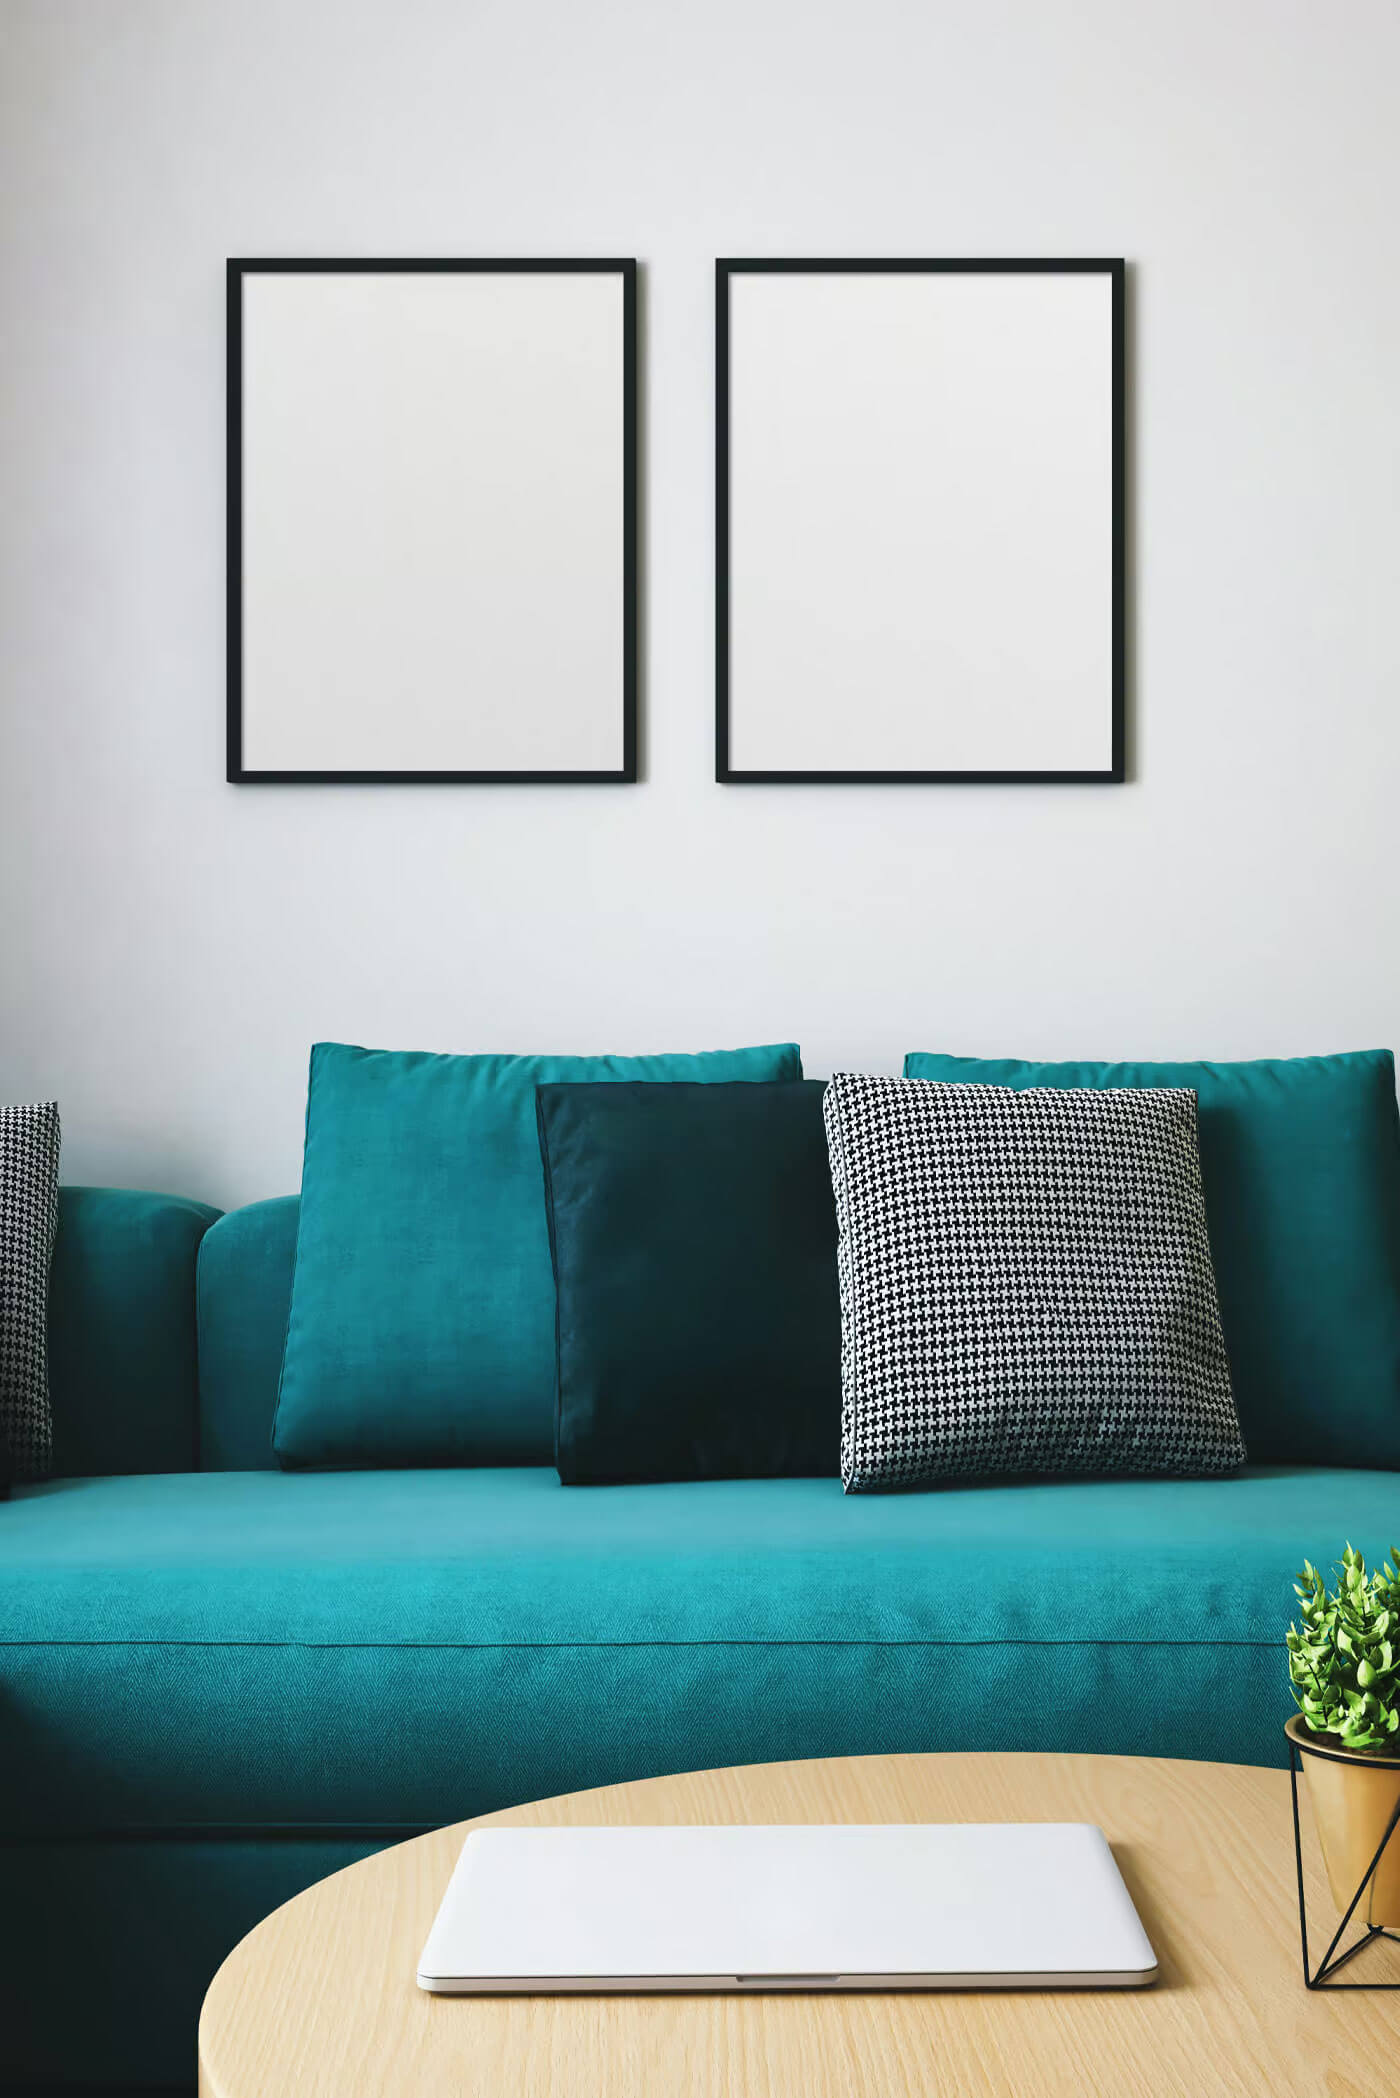 Living Room with two Poster Frames Mockup